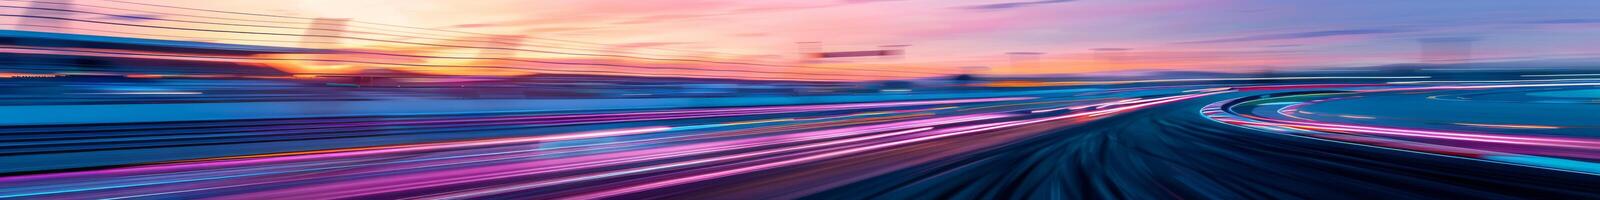 Early Morning Light Streaks on Speedway Circuit photo